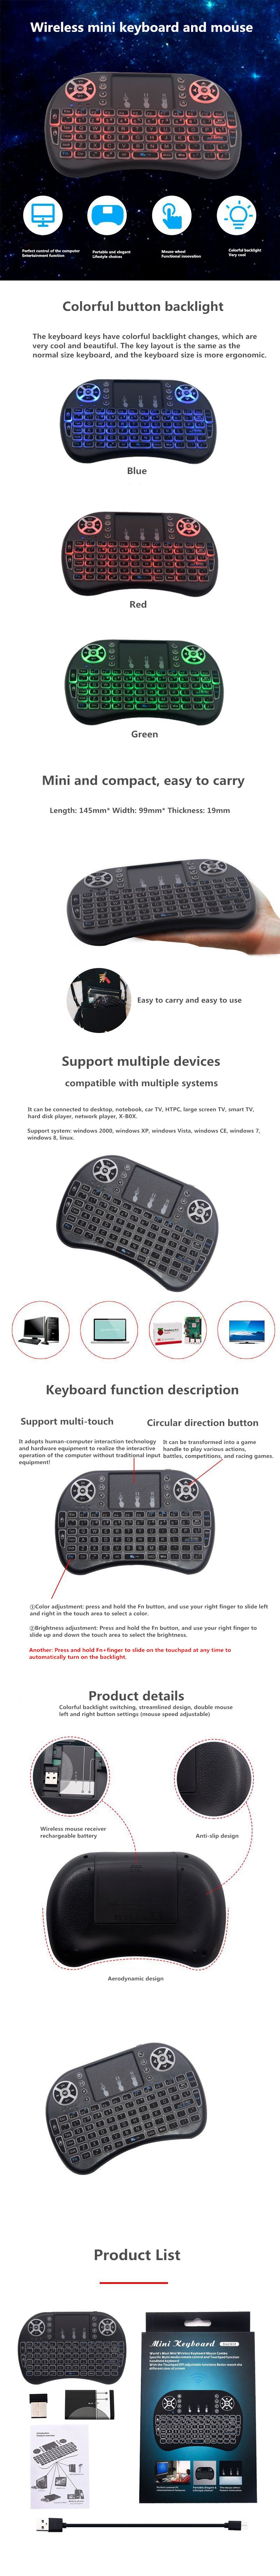 Raspberry-Pi-4B3B-Touchpad-Keyboard-and-Mouse-Wireless-Mini-Keyboard-and-Mouse-24G-Free-Drive-with-C-1748201